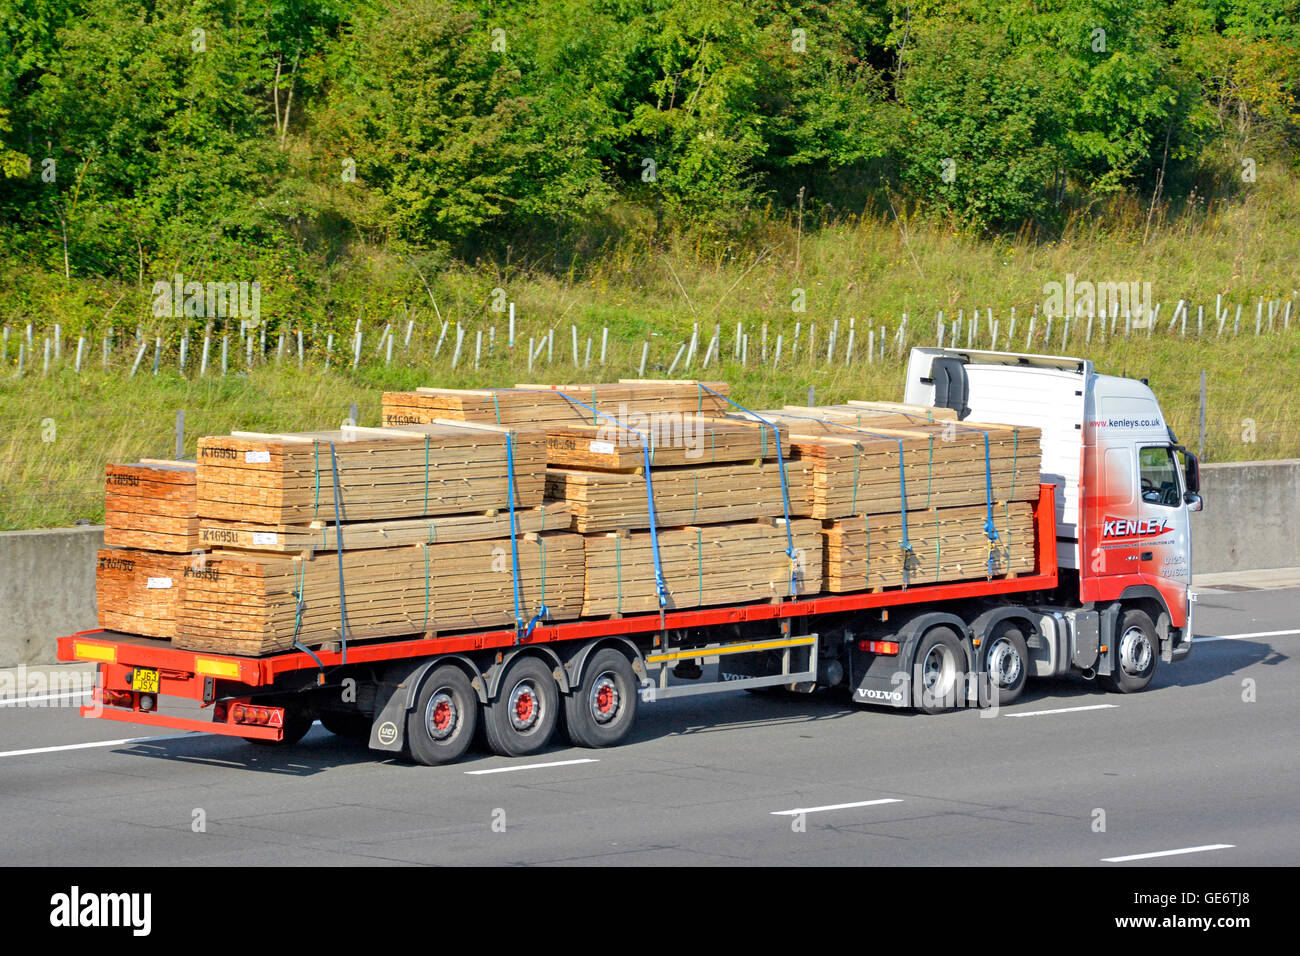 Construction materials supply chain transportation logistics via Hgv articulated lorry & trailer loaded with timber driving along UK English motorway Stock Photo